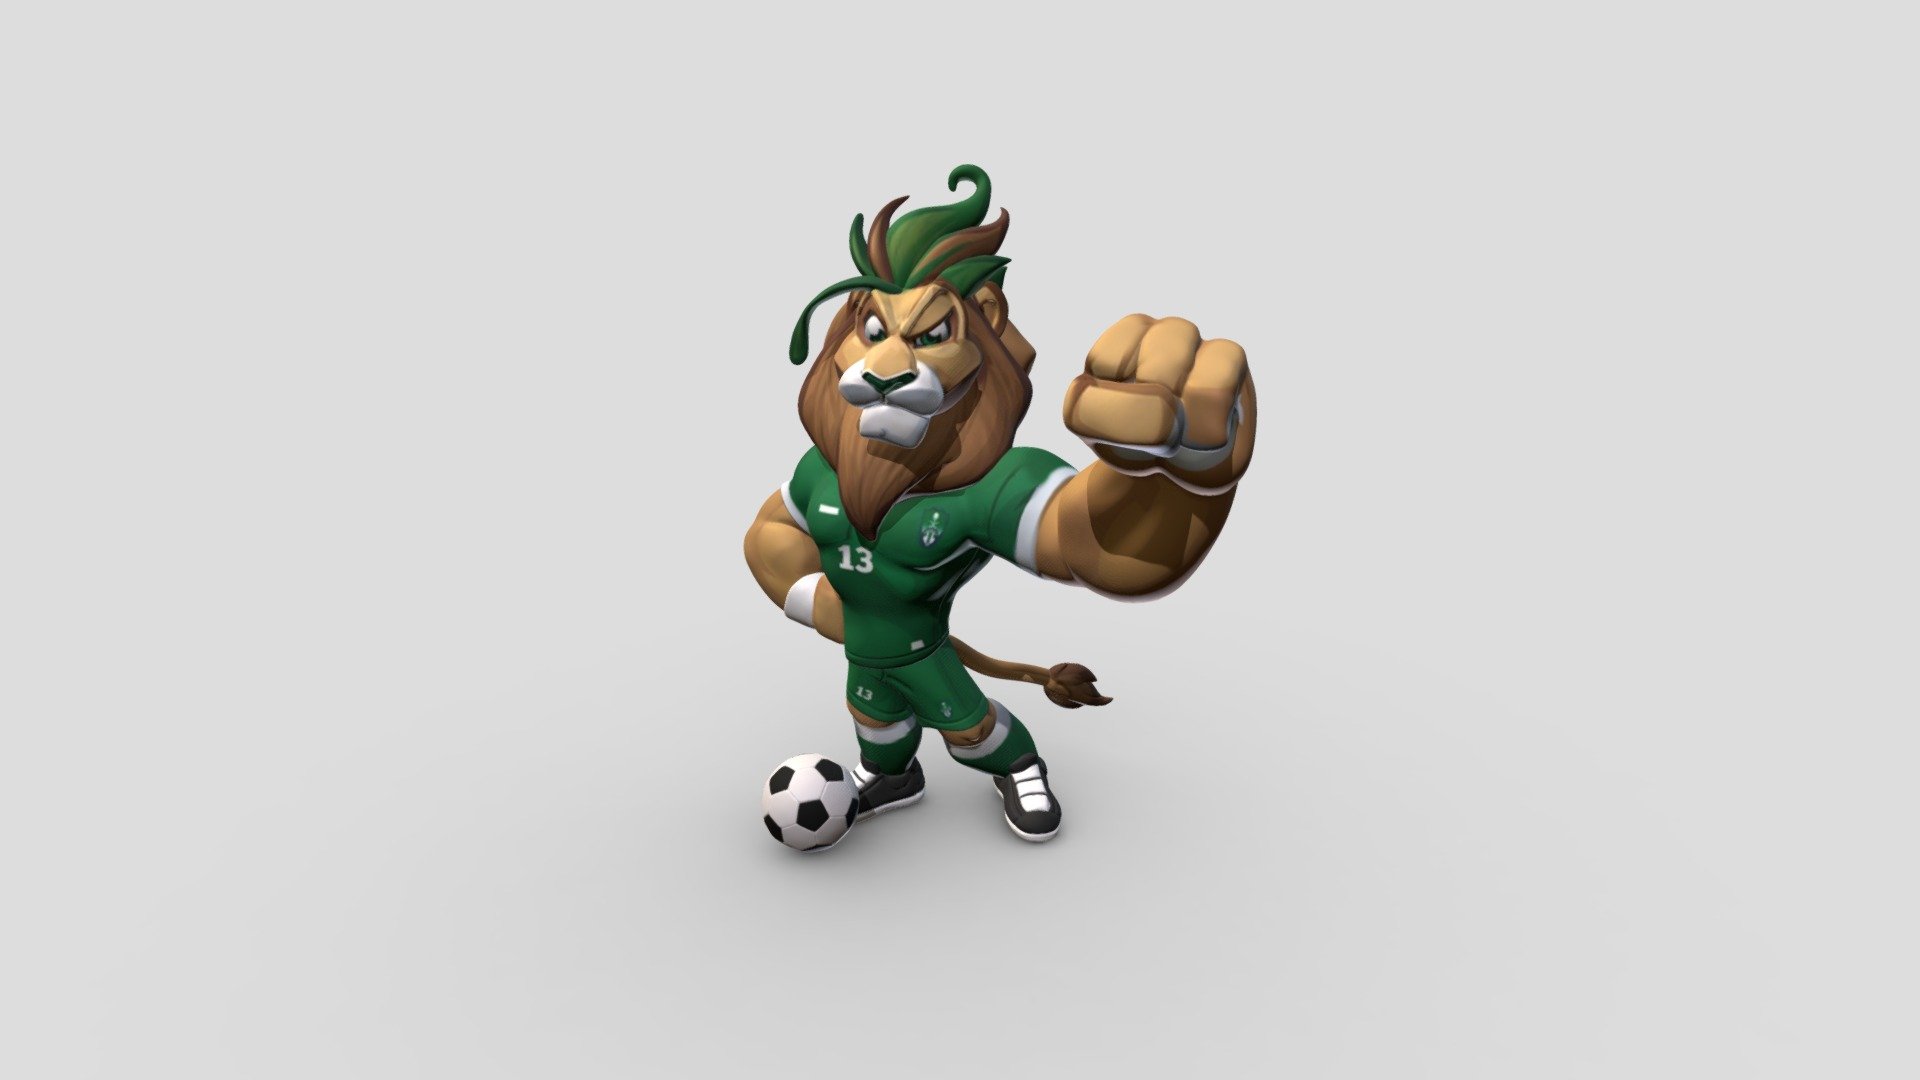 This is Lion Mascot Cartoon 3d model, this is 3D printable model so everyone can do 3D print this Model 3d model